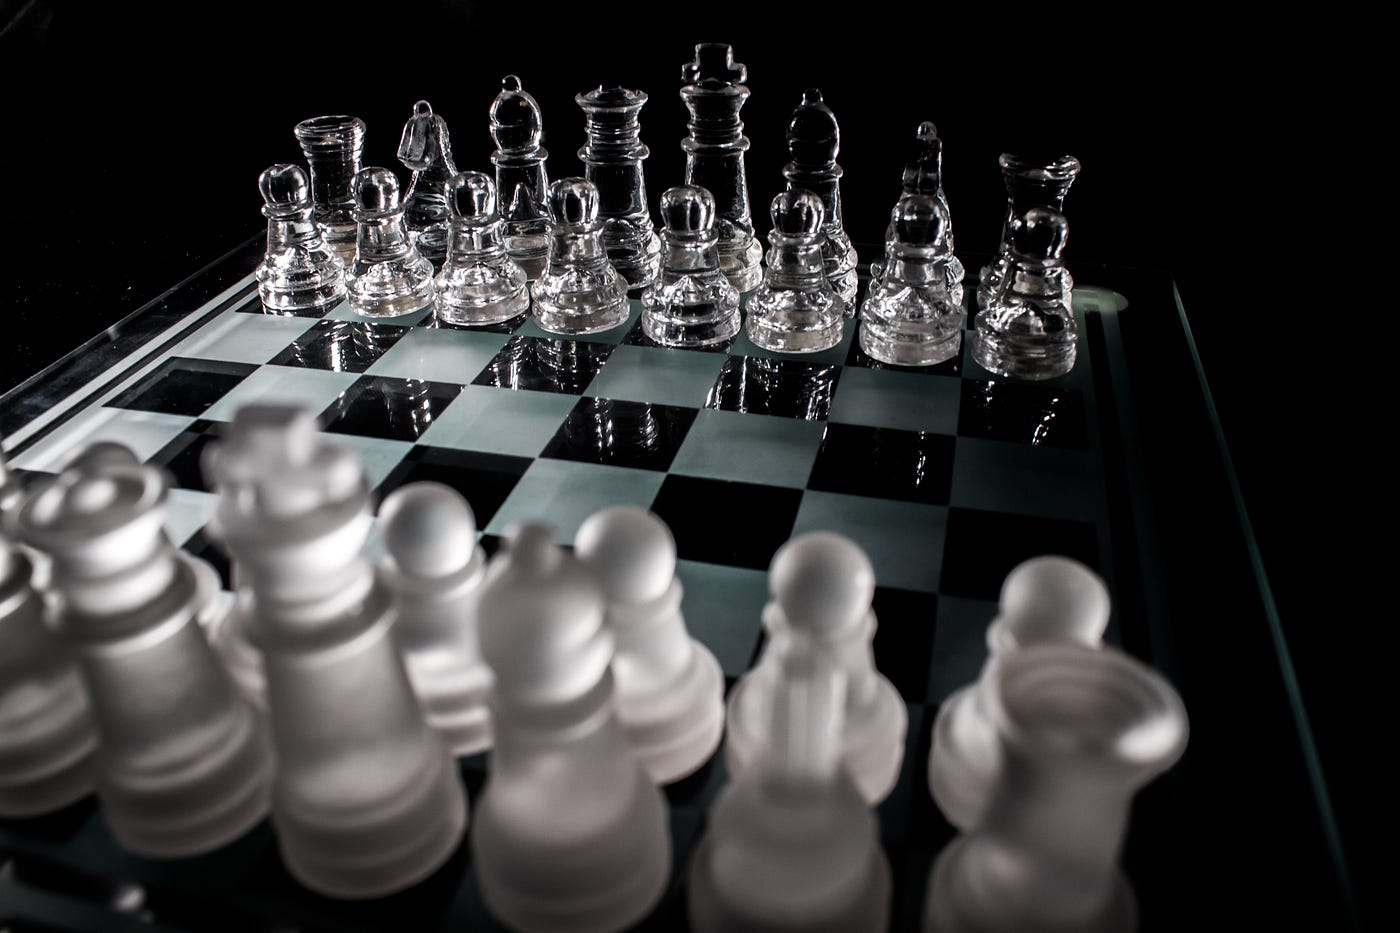 What is the highest Elo chess rating possible? - Quora